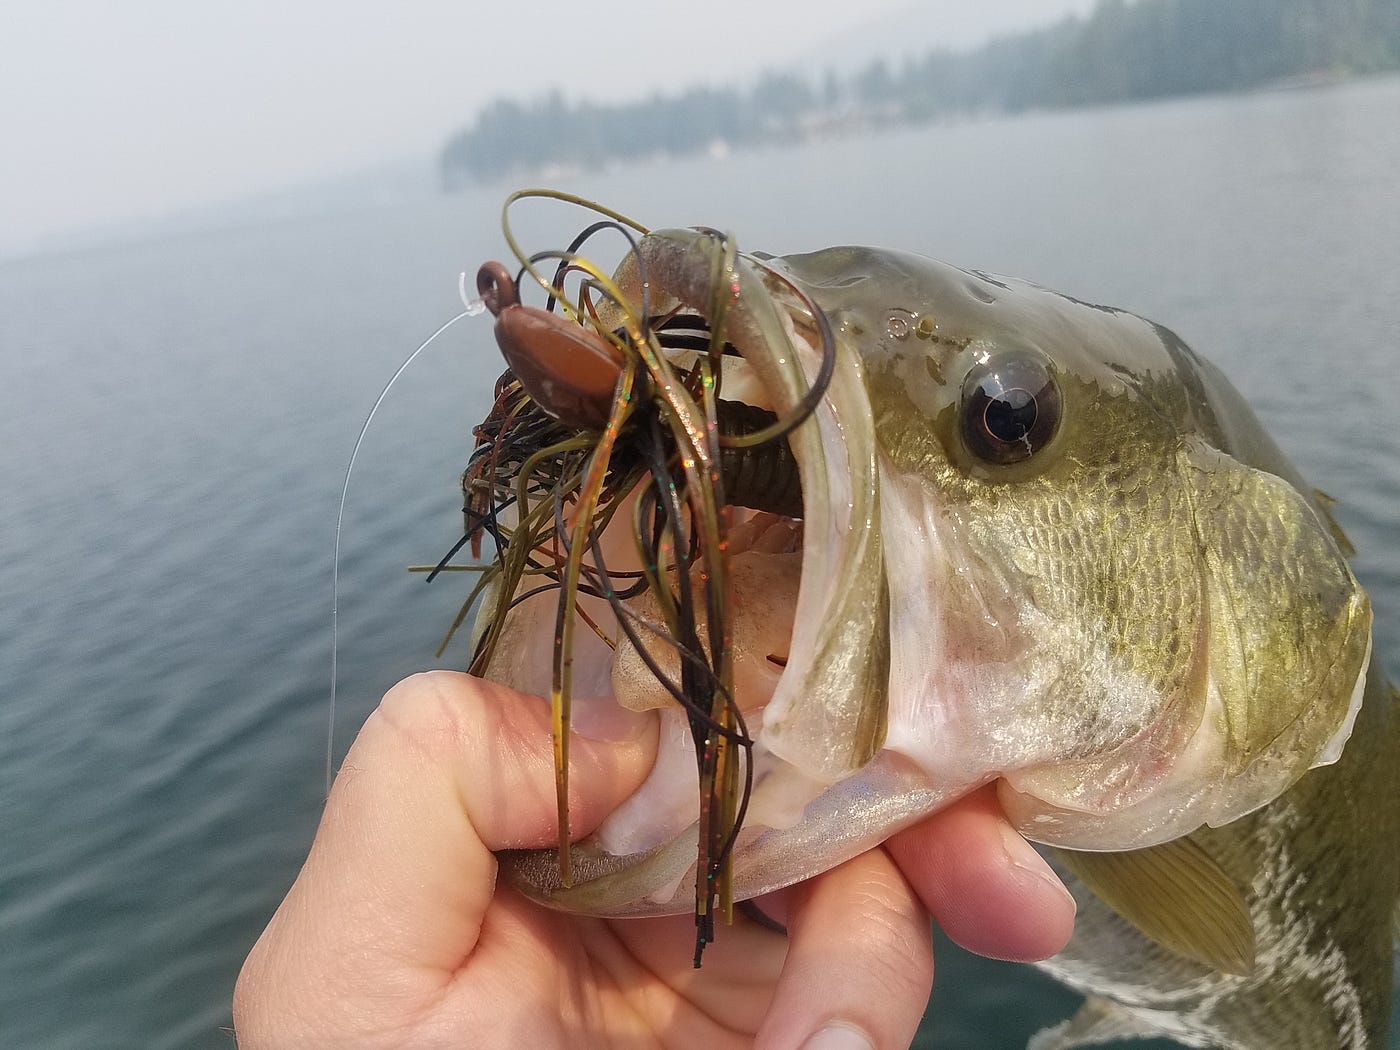 Dead bait can effective when going saltwater fishing